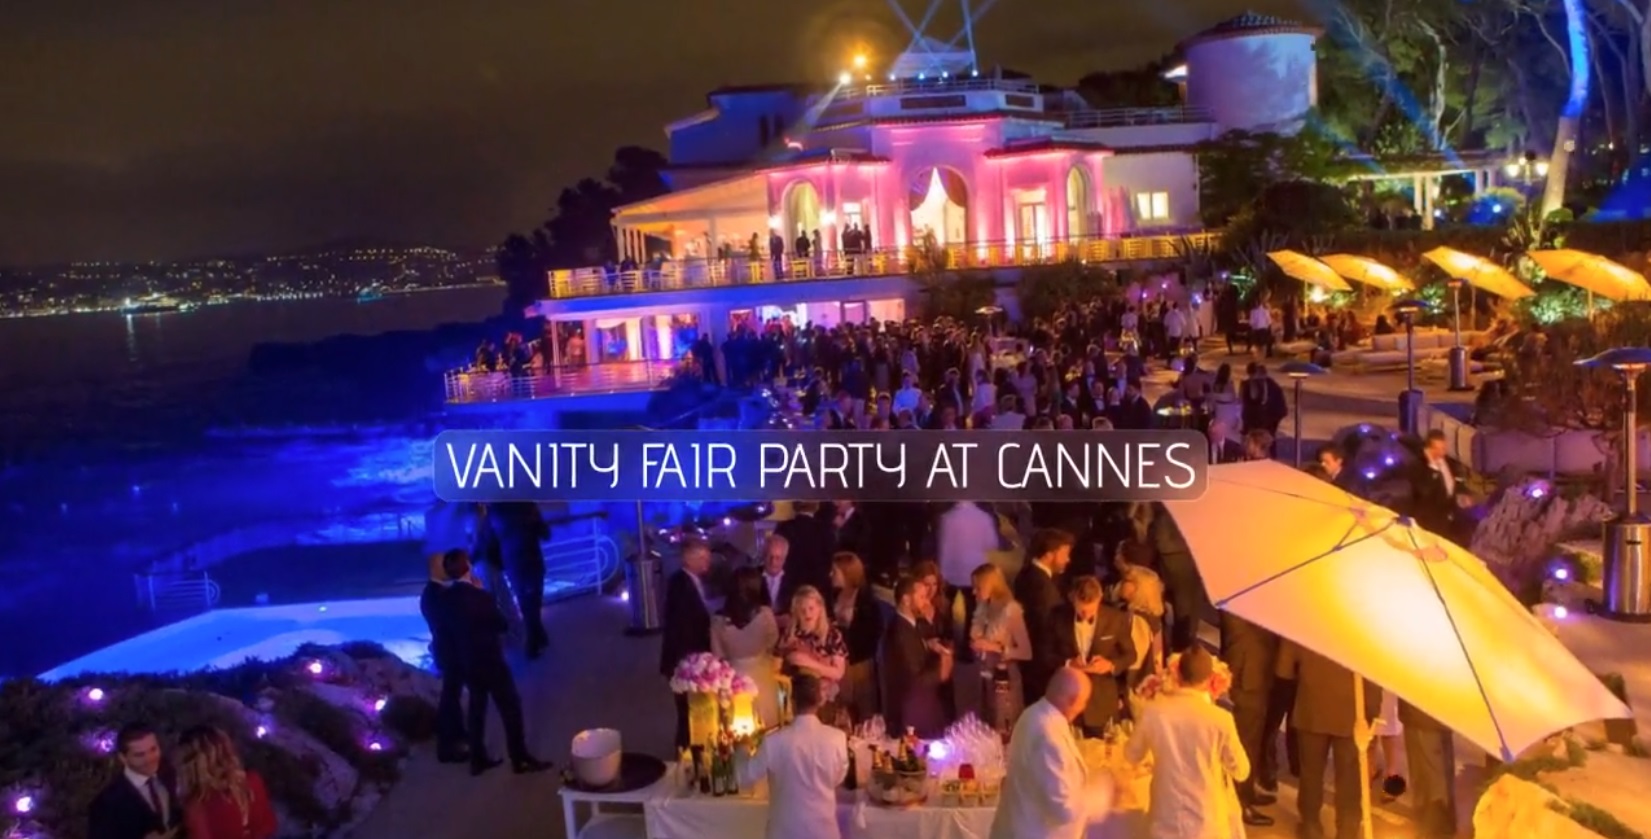 buy tickets to vanity fair party at cannes film festival with celebrities